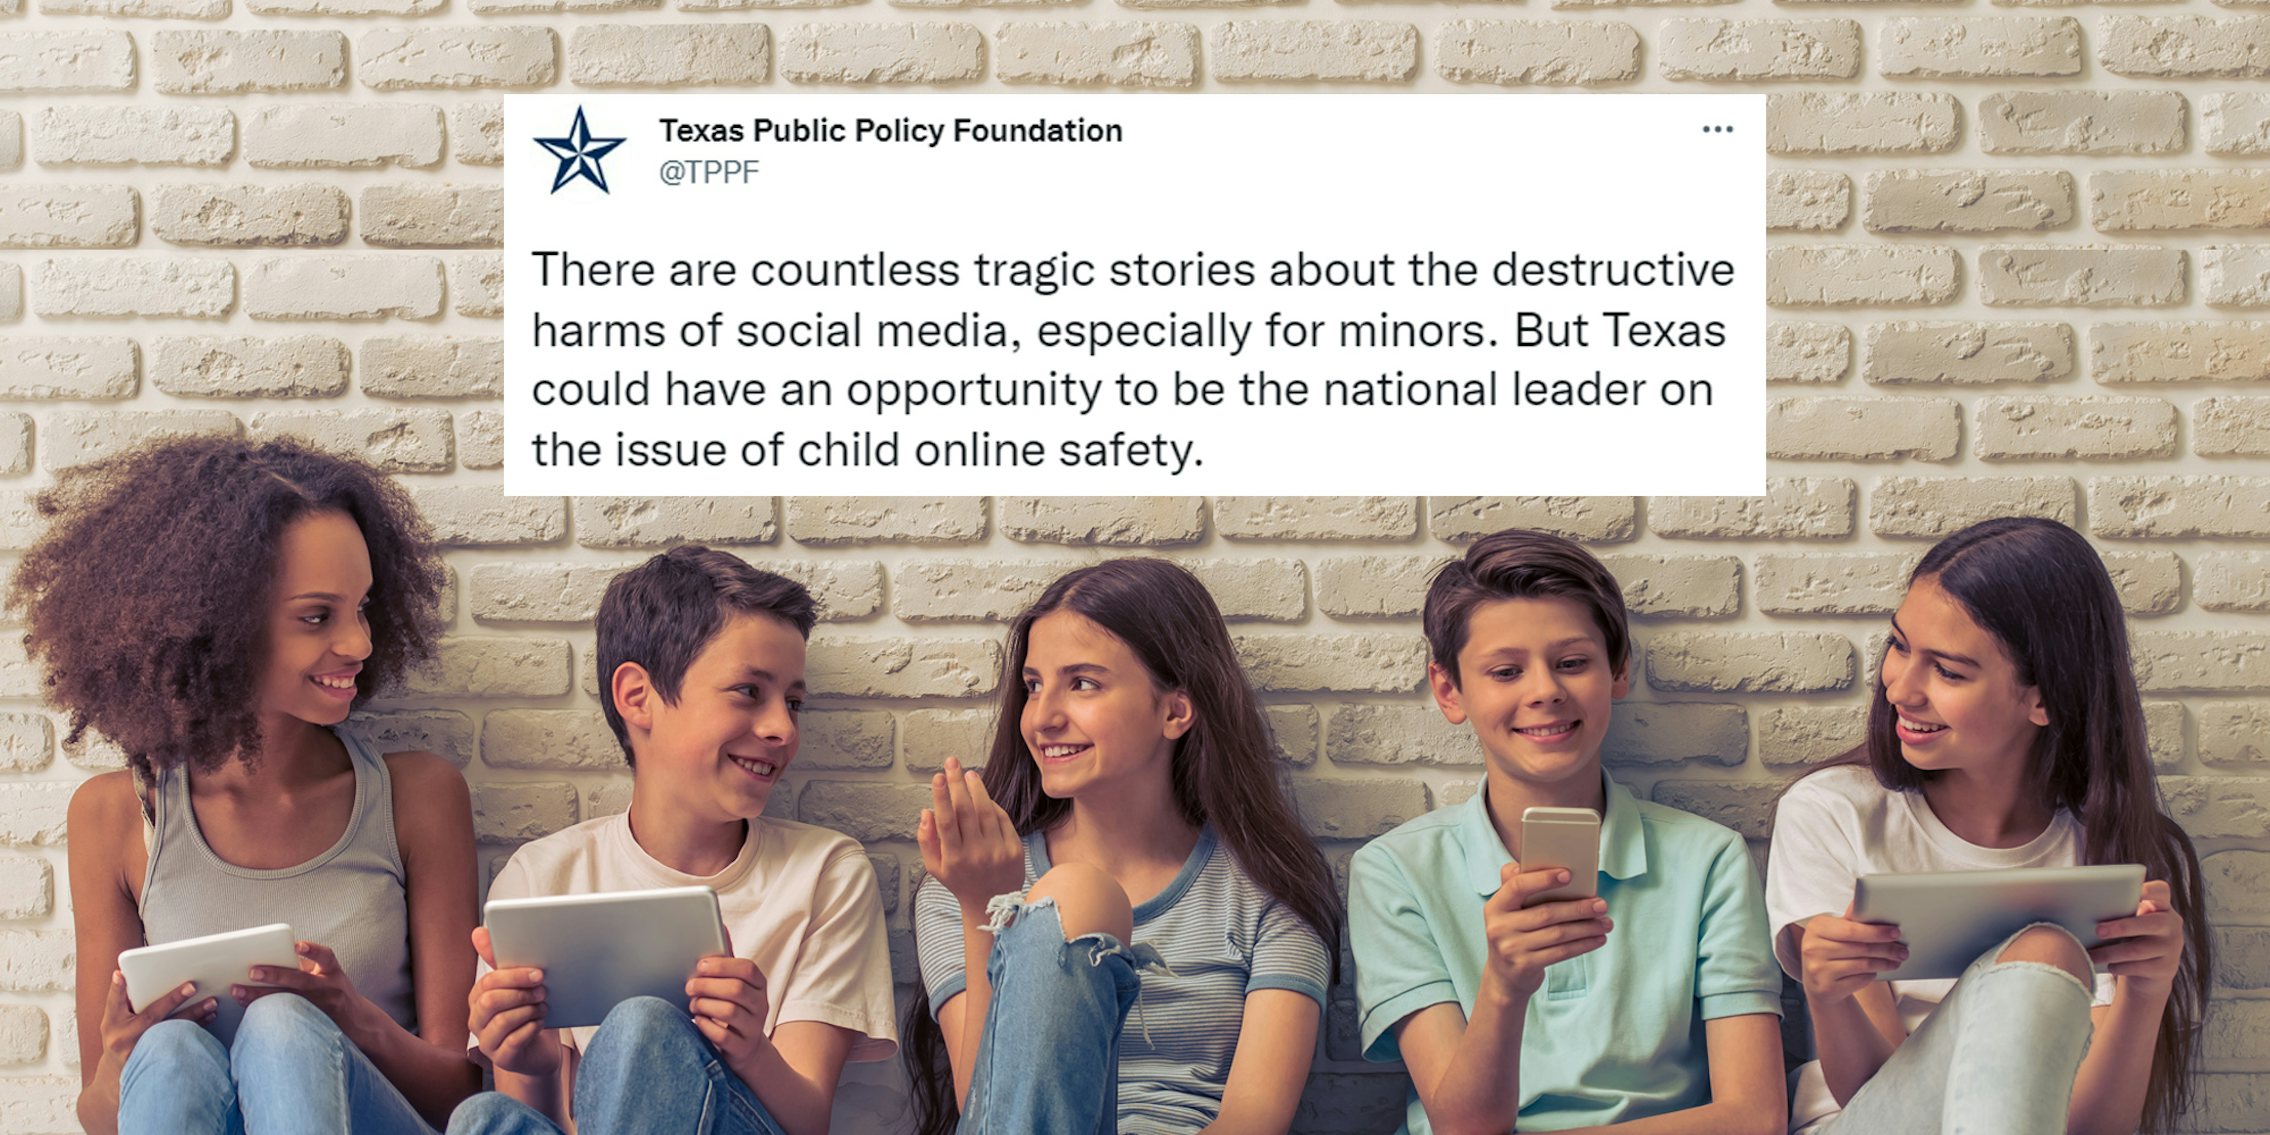 teen kids sitting against tan brick wall on phones and iPads with tweet by Texas Public Policy Foundation above caption 'There are countless tragic stories about the destructive harms of social media, especially for minors. But Texas could have an opportunity to be the national leader on the issue of child safety online'